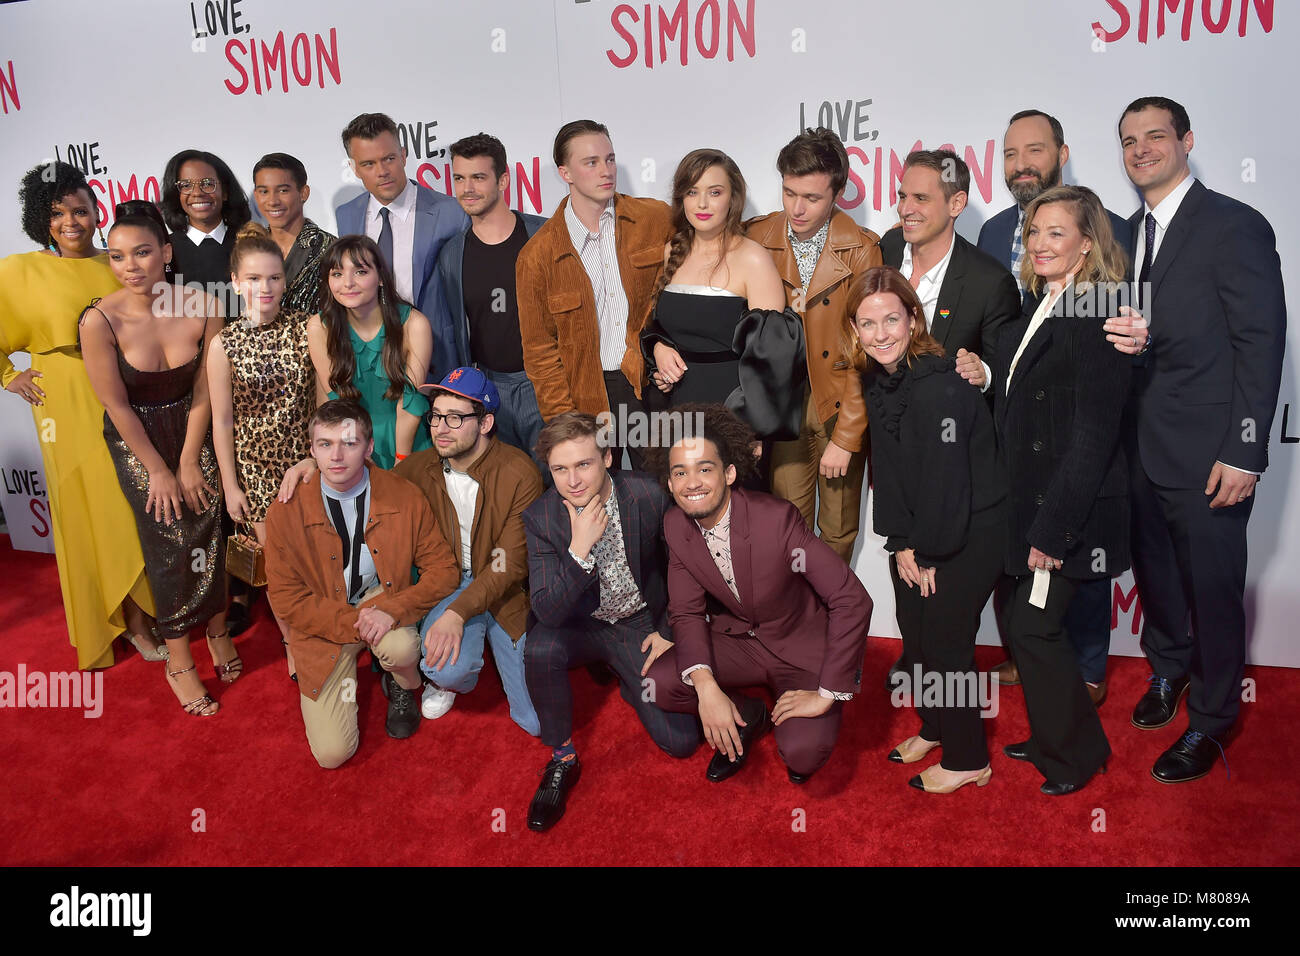 Los Angeles, California. March 13, 2018.  Cast attending the 'Love, Simon' special screening at Westfield Century City on March 13, 2018 in Los Angeles, California. Credit: Geisler-Fotopress/Alamy Live News Stock Photo